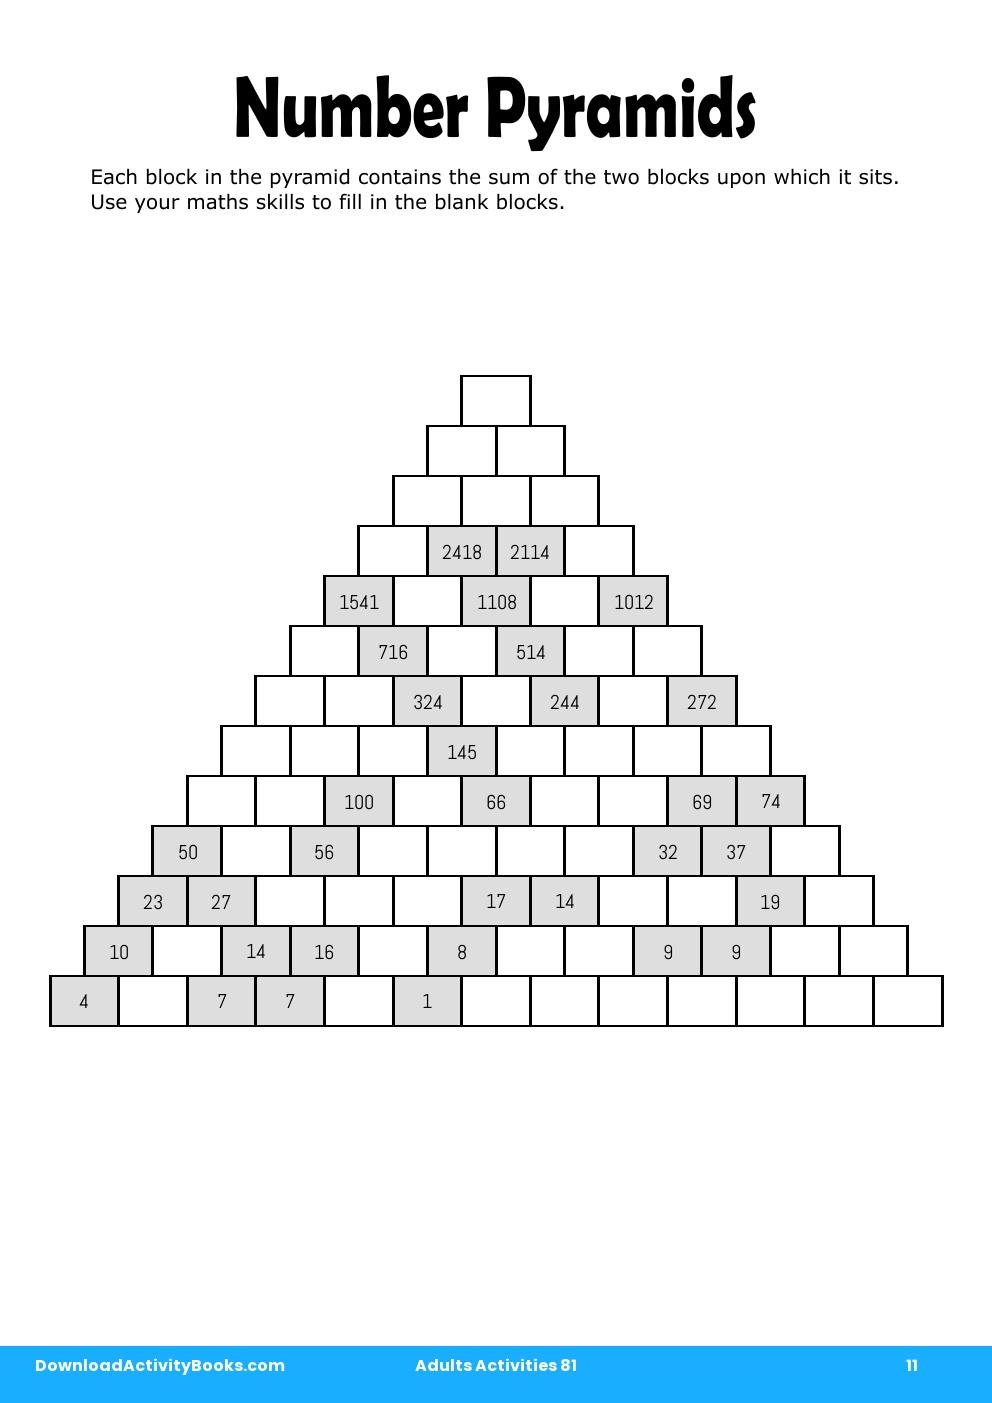 Number Pyramids in Adults Activities 81